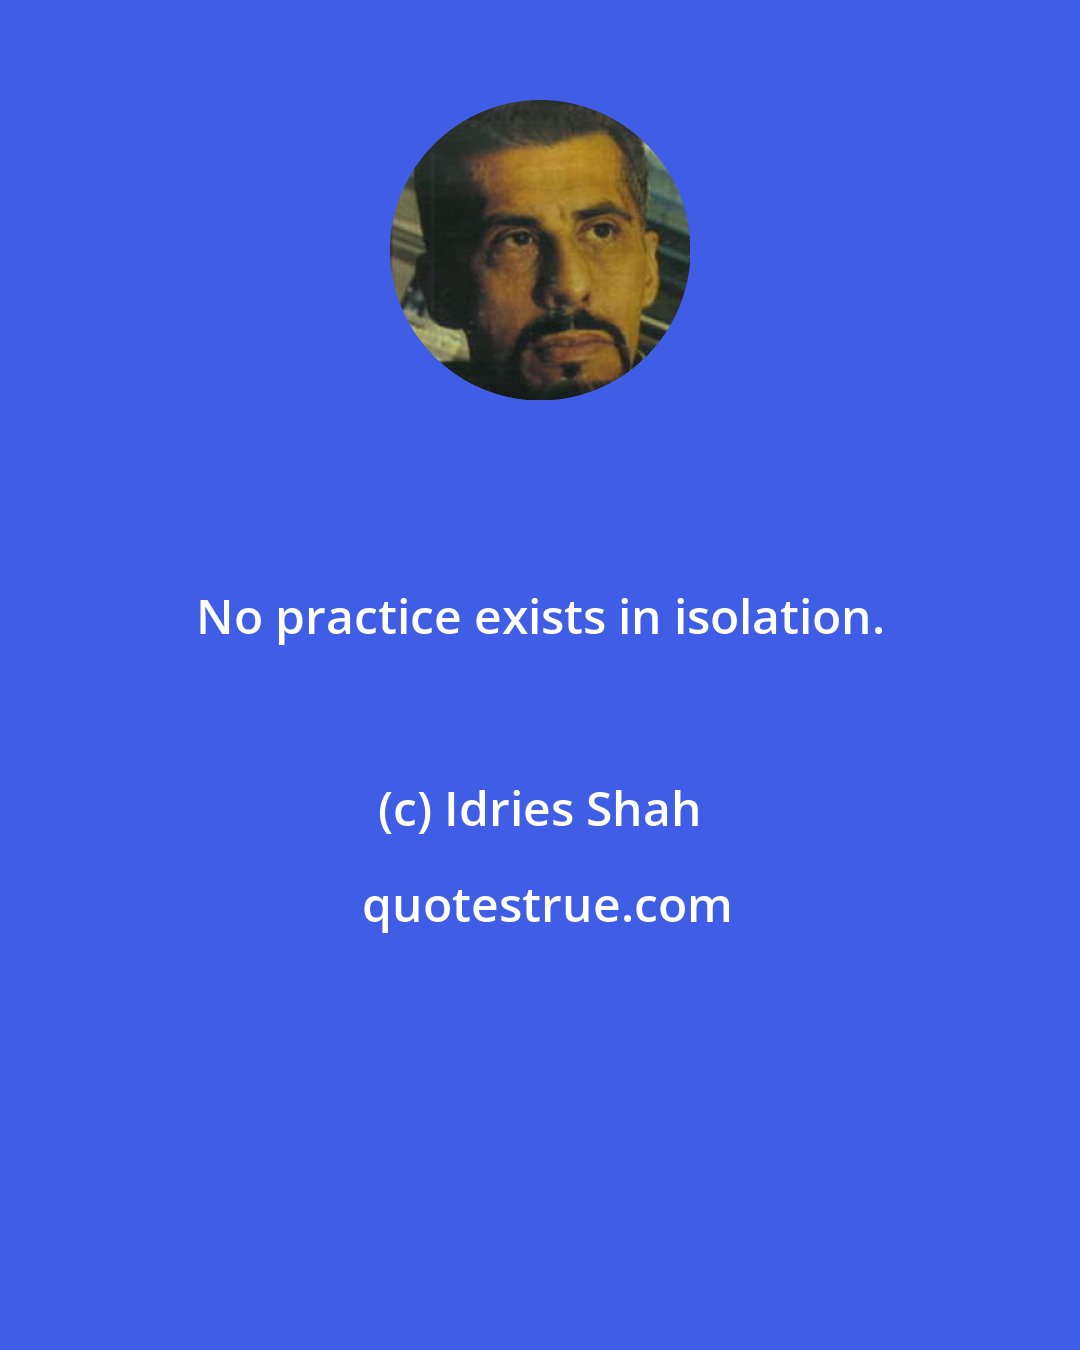 Idries Shah: No practice exists in isolation.